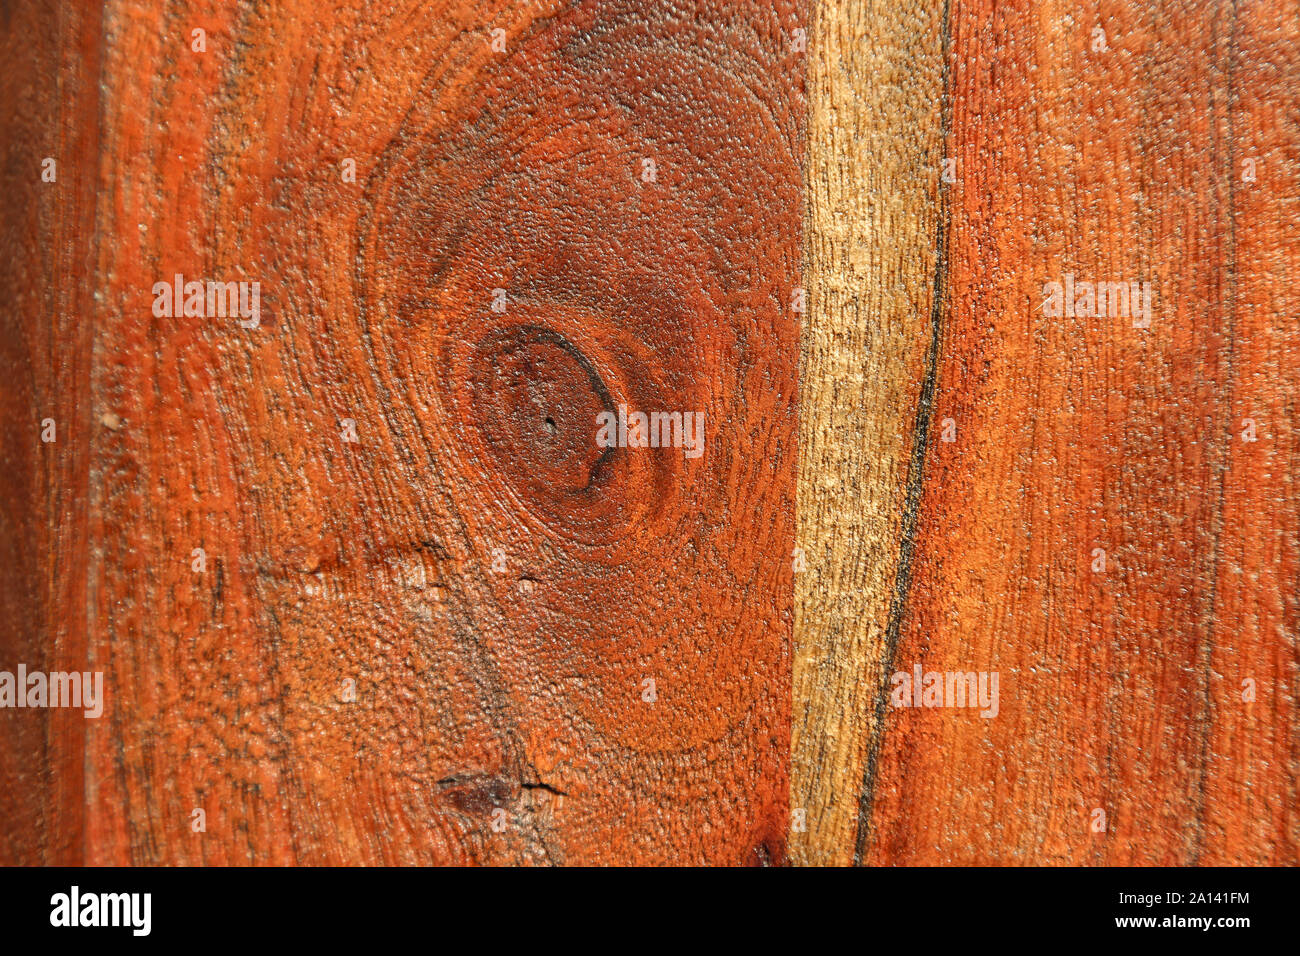 Wood texture with knots and detail on the wood grain Stock Photo